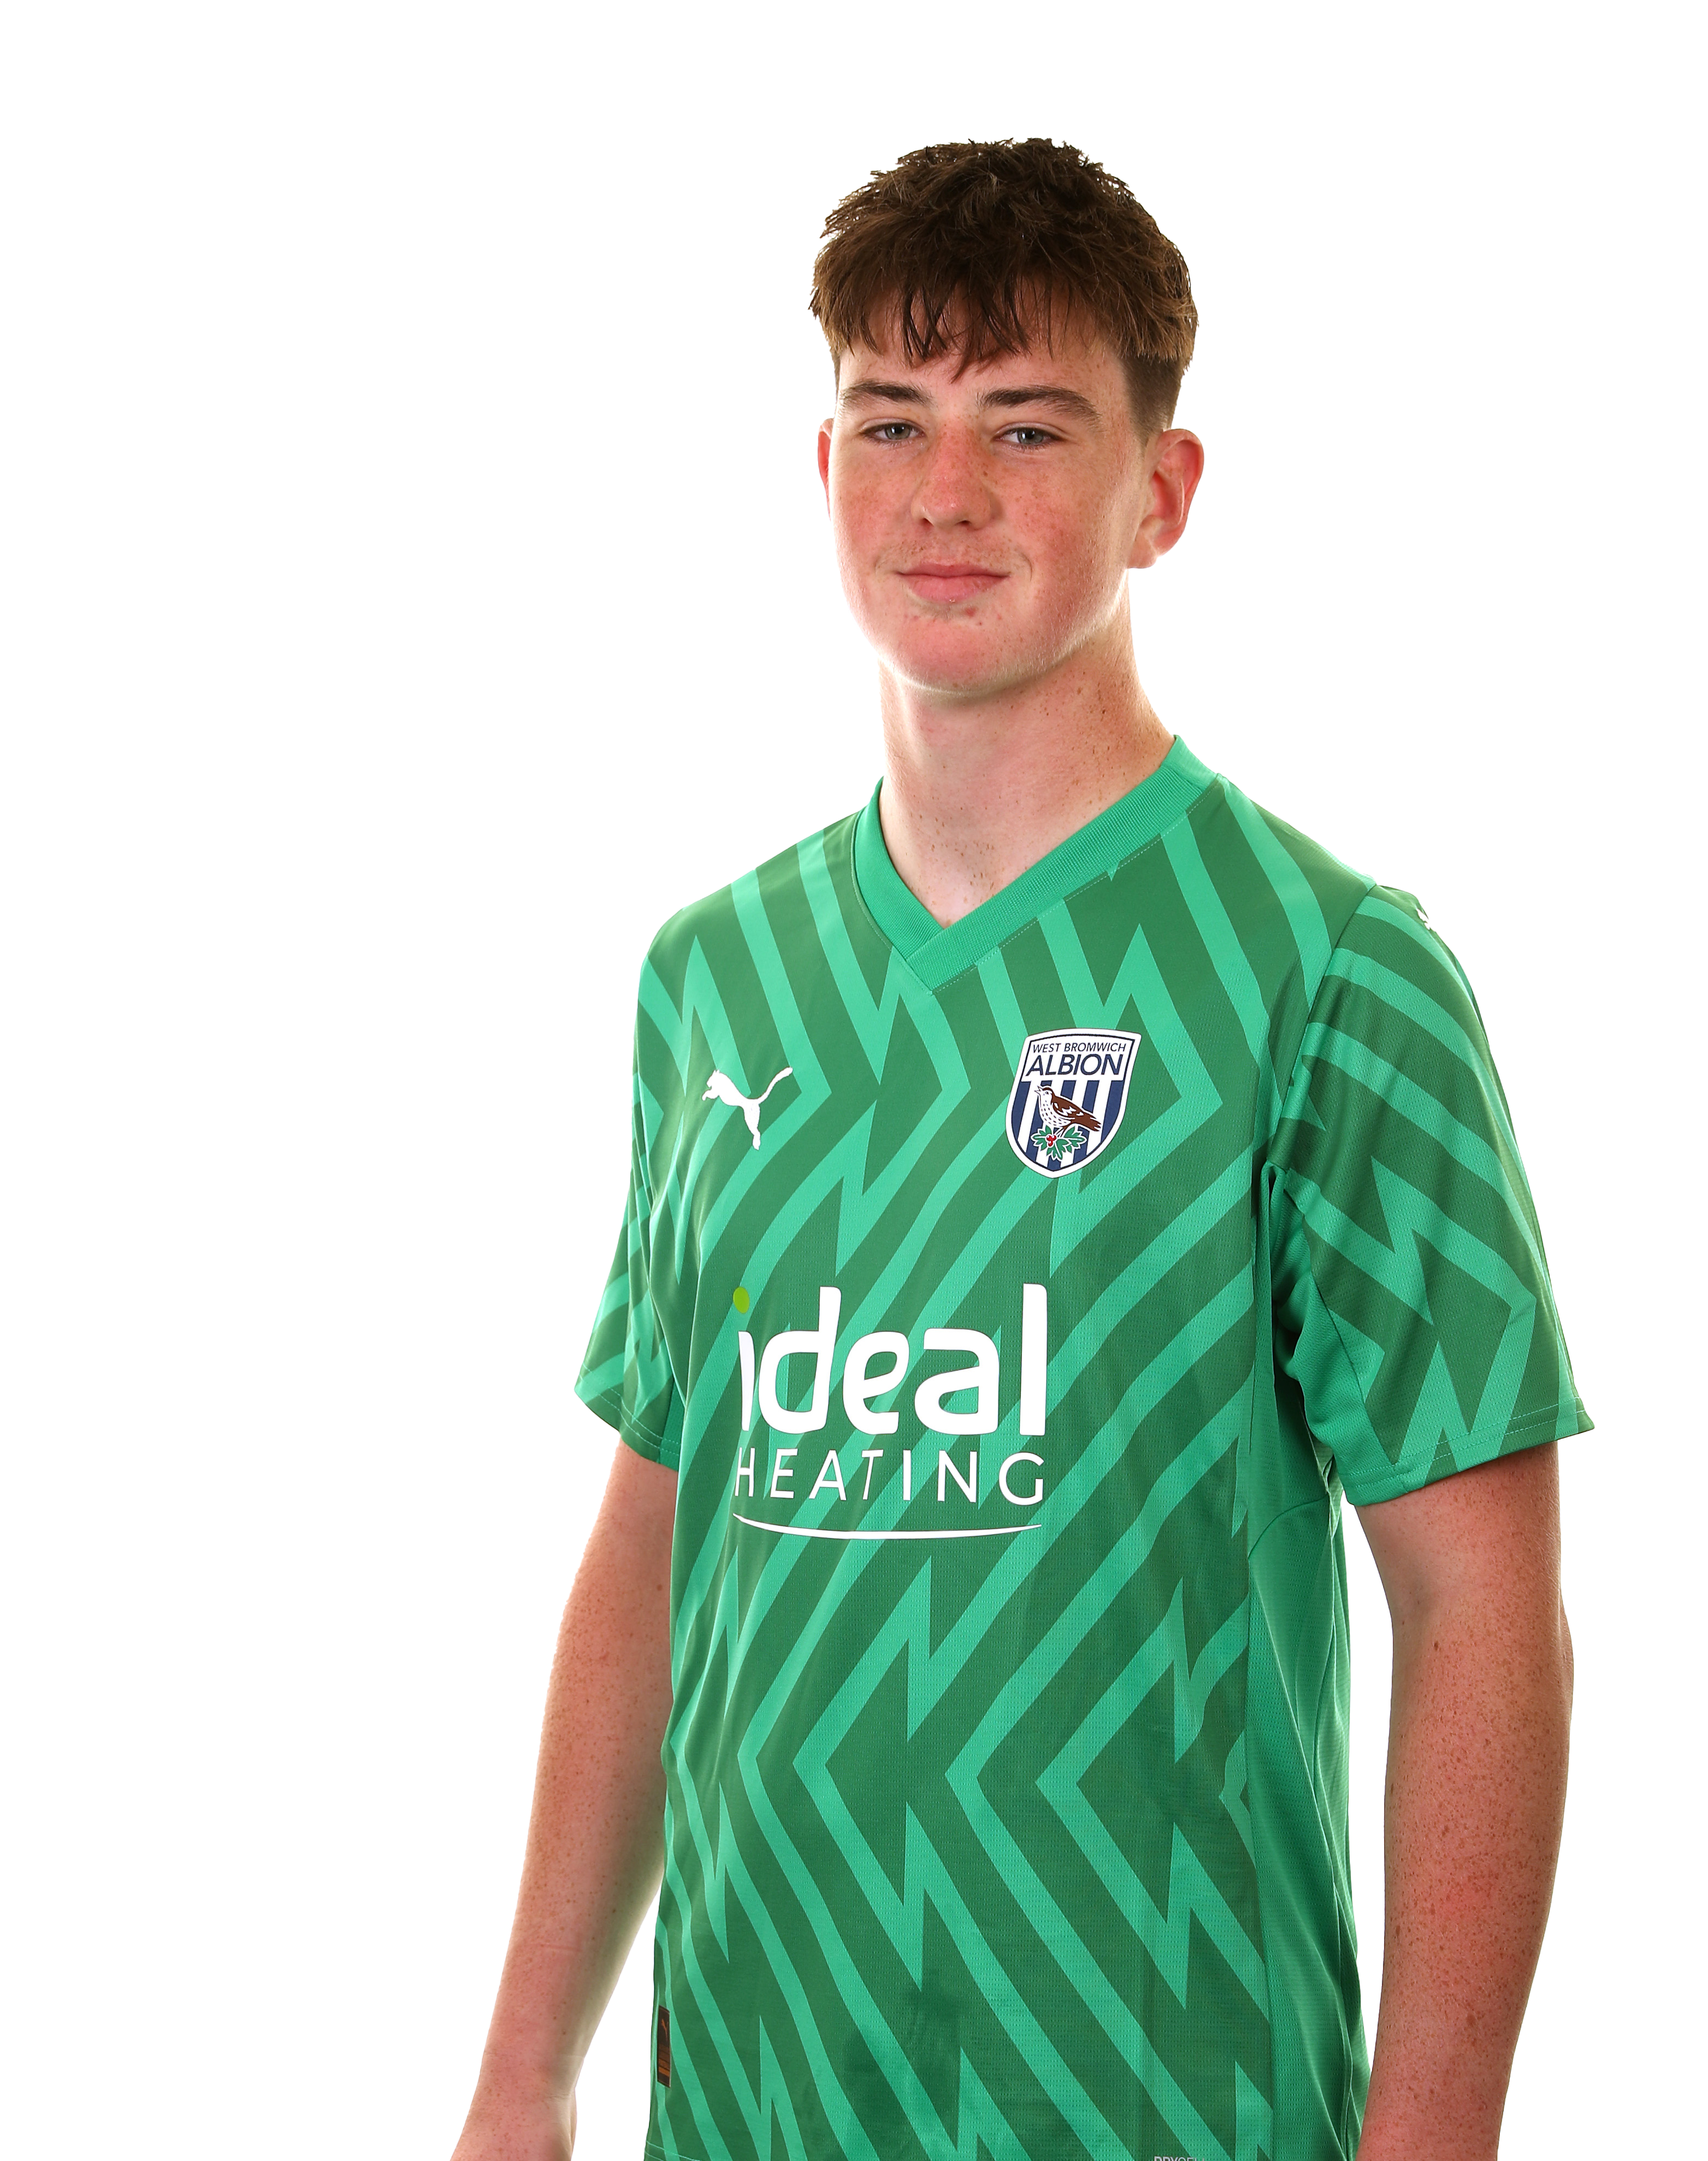 A photo headshot of Albion Under-18s player Louis Brady ahead of the 2023/24 season